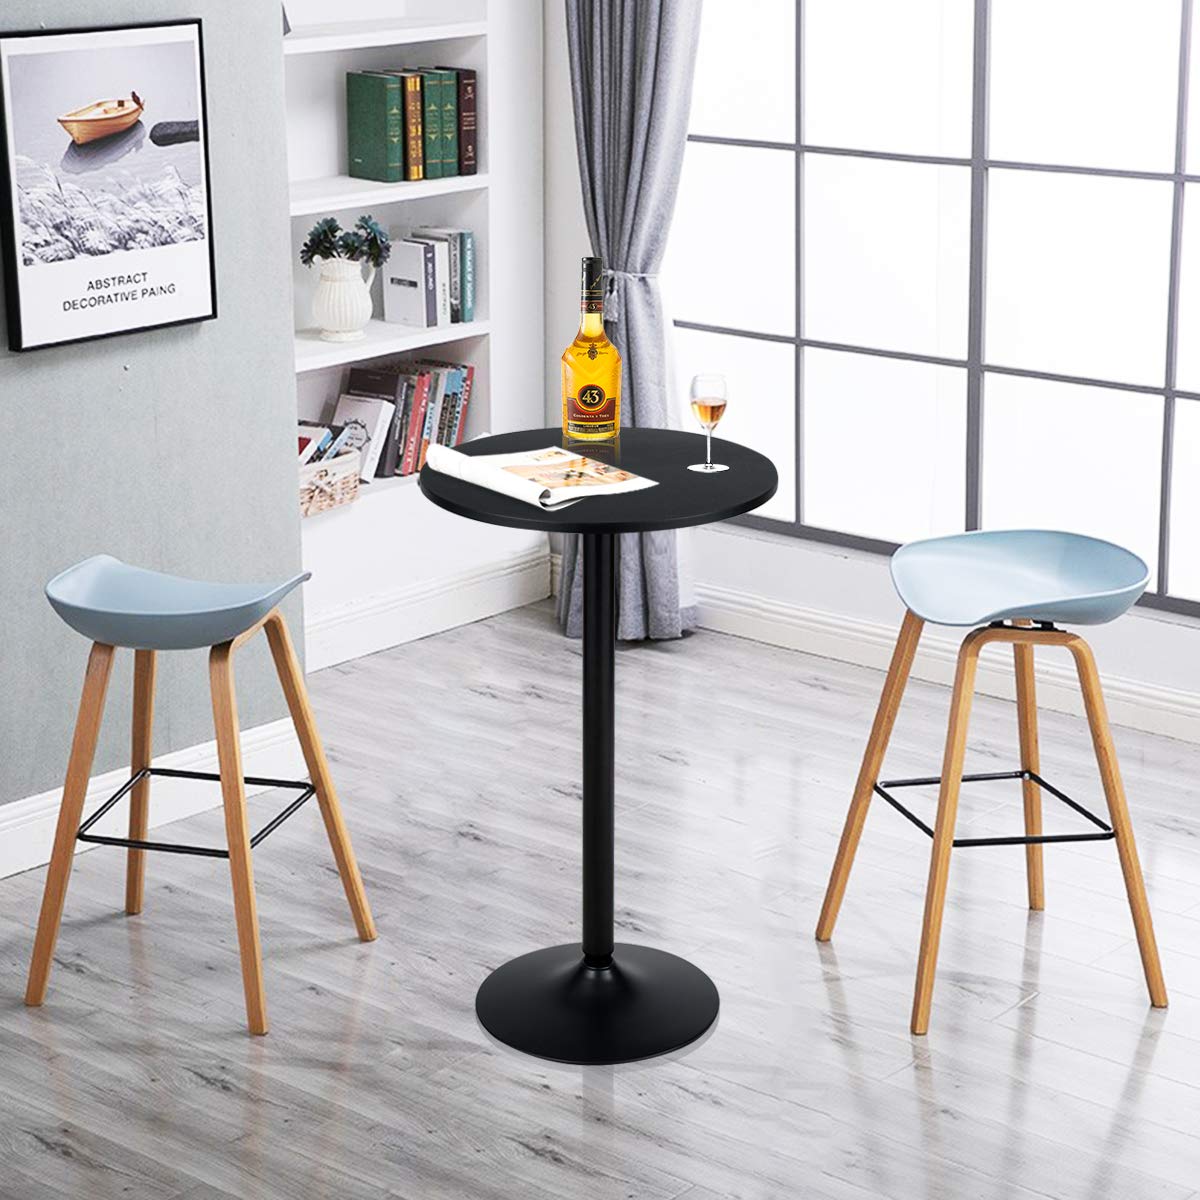 Giantex 24-Inch Pub and Bar Table 40-Inch Height Modern Style Round Top Standing Circular Cocktail Table